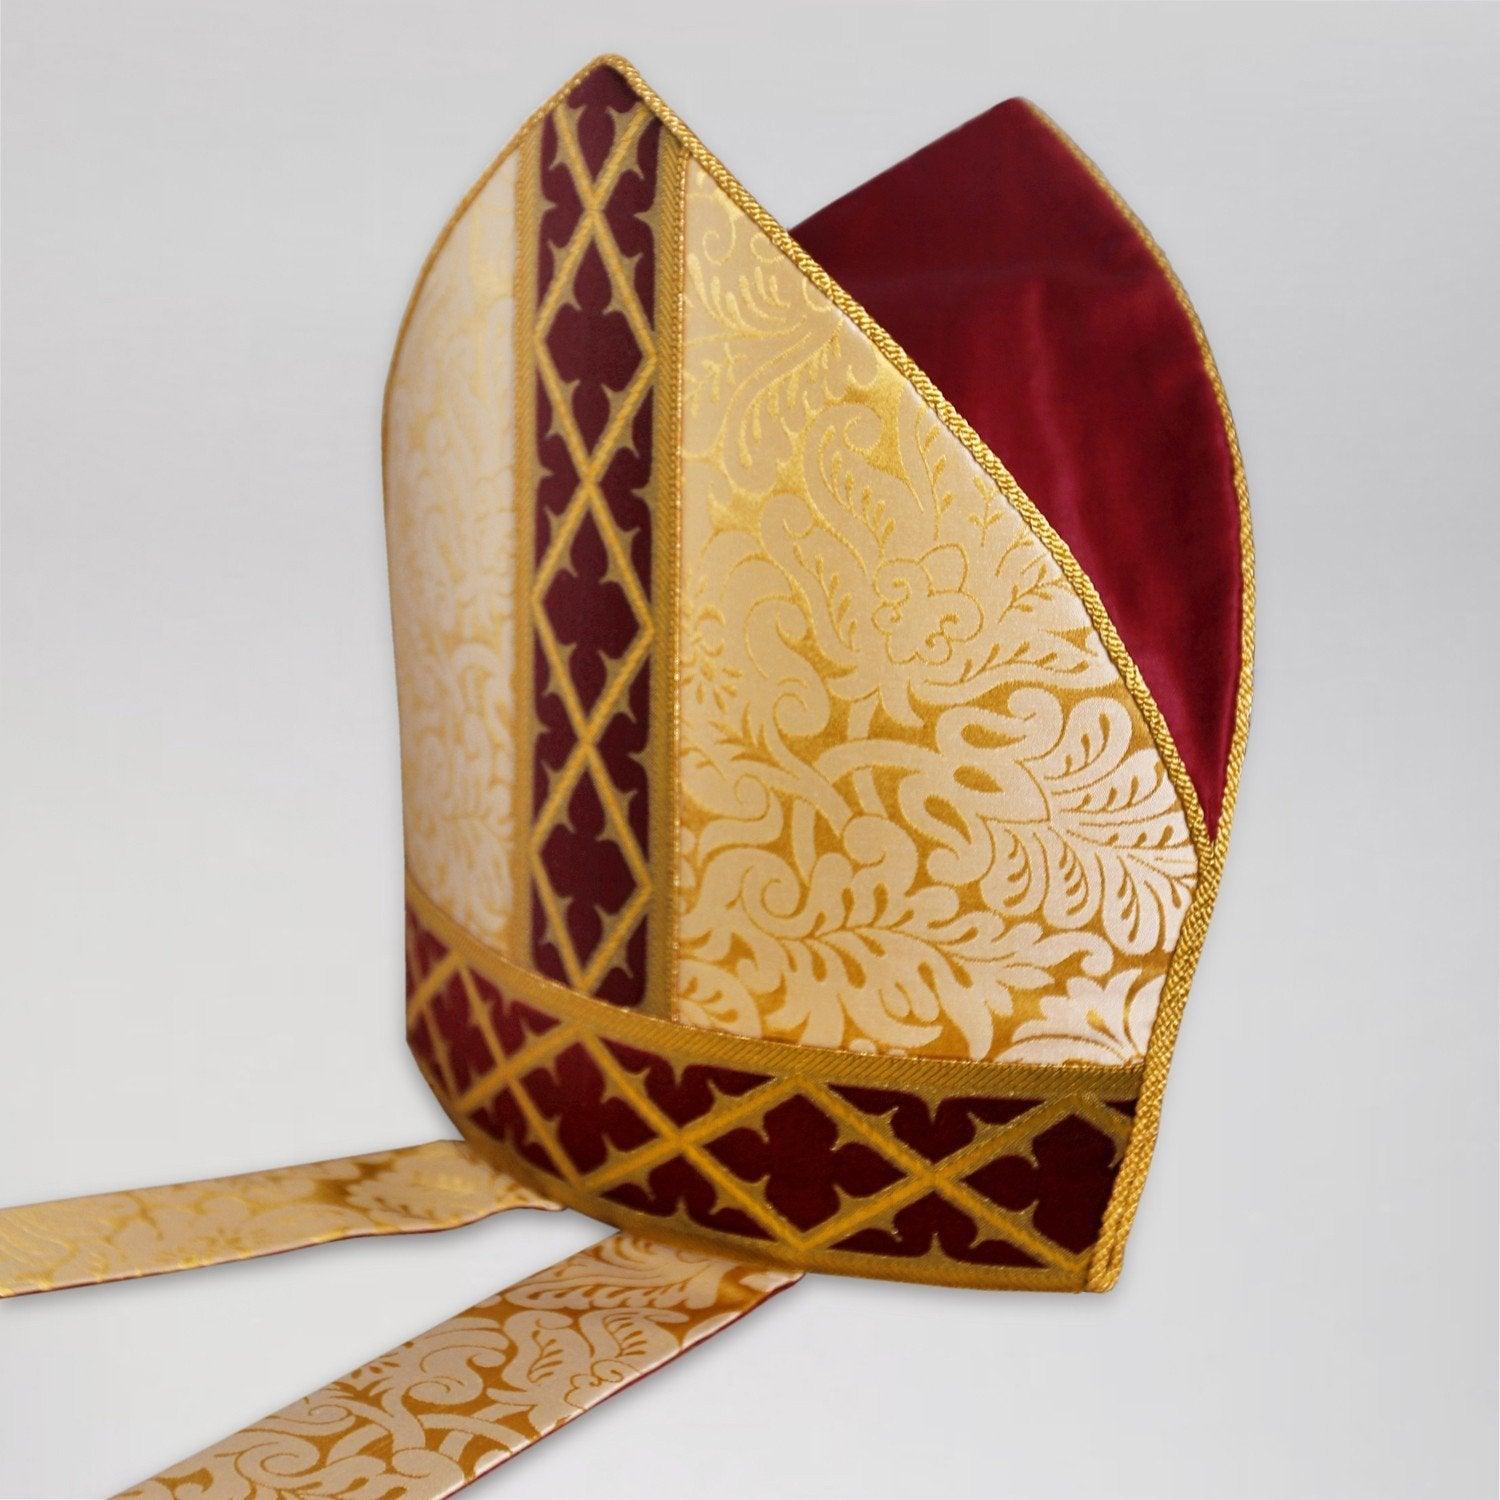 Prinknash Mitre in Cream/Gold Holbein, with Red/Gold Trellis Orphreys - Watts & Co. (international)